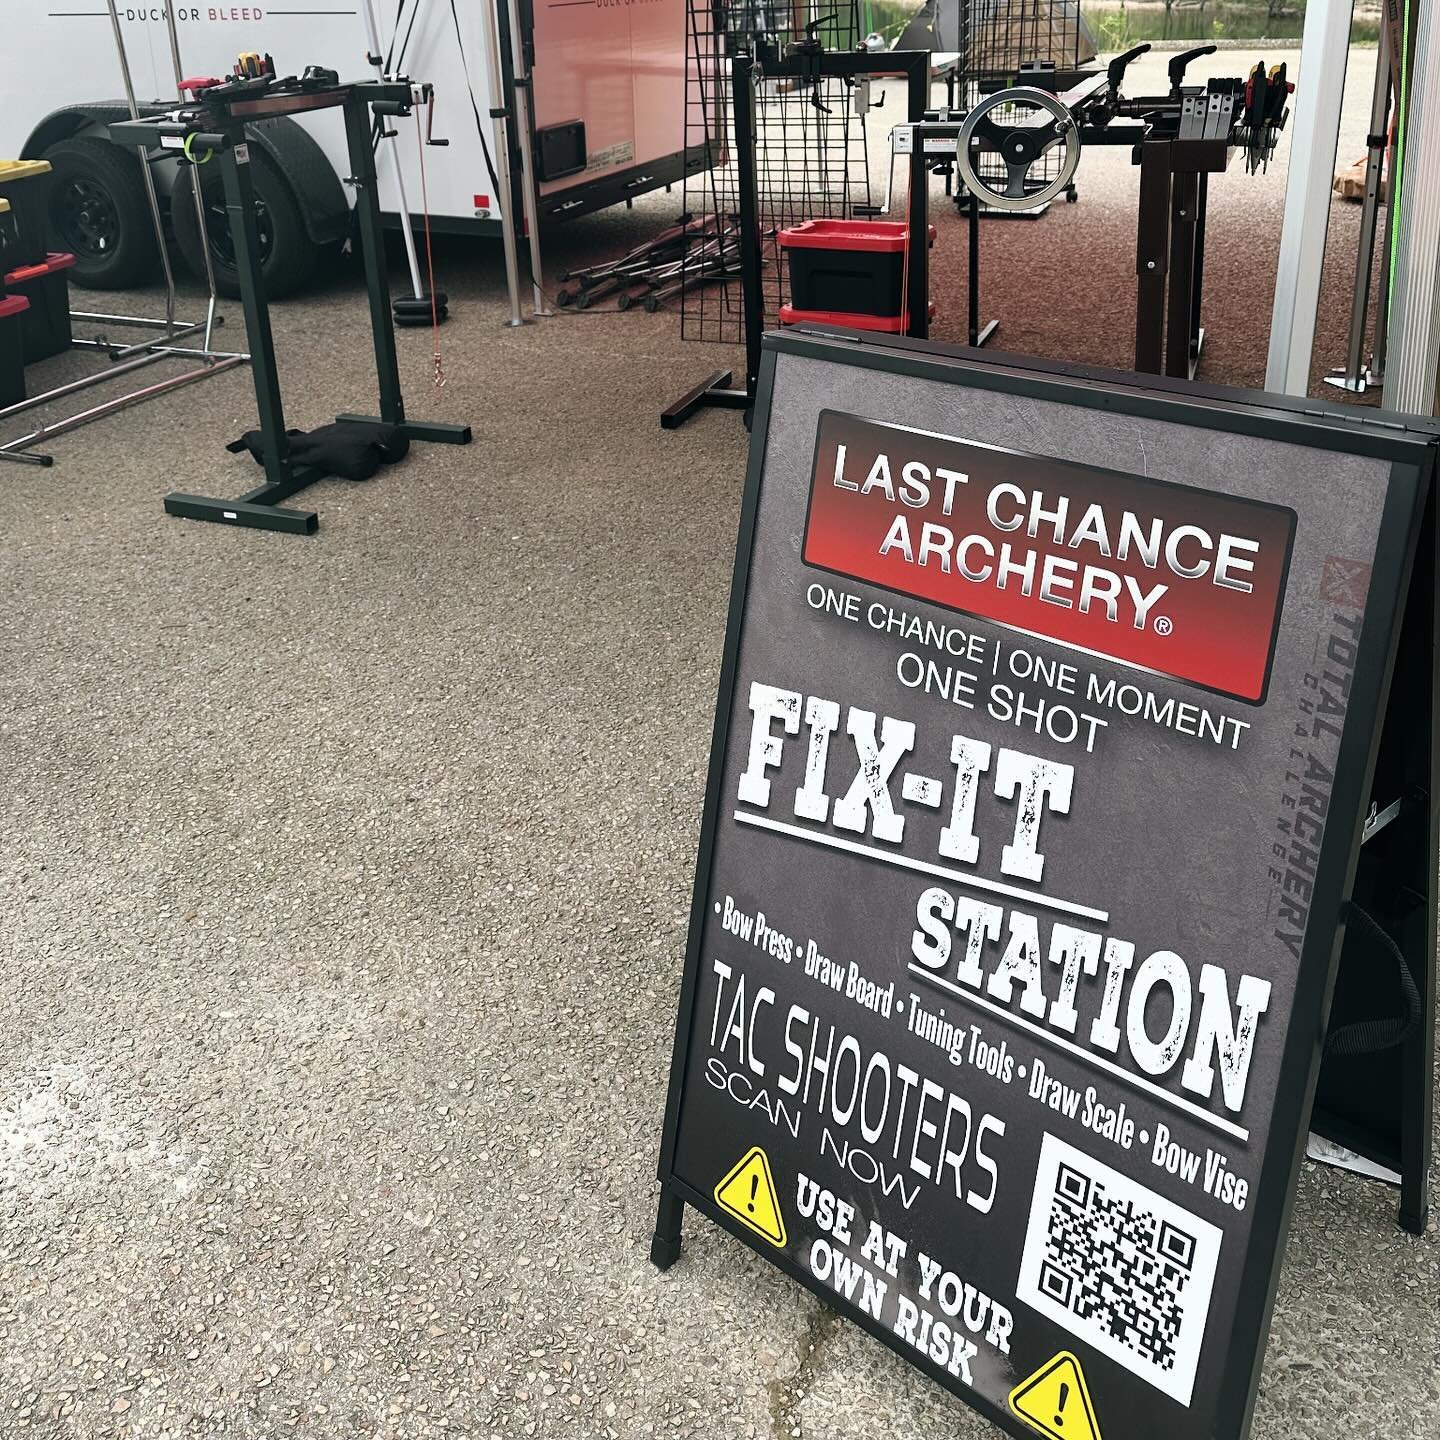 If you&rsquo;re attending this weekends @totalarcherychallenge be sure to check out the Fix-It station. If you need to tune, or have a breakdown, the Fix-It station should have the tools you need to make repairs! 

#lastchancearchery